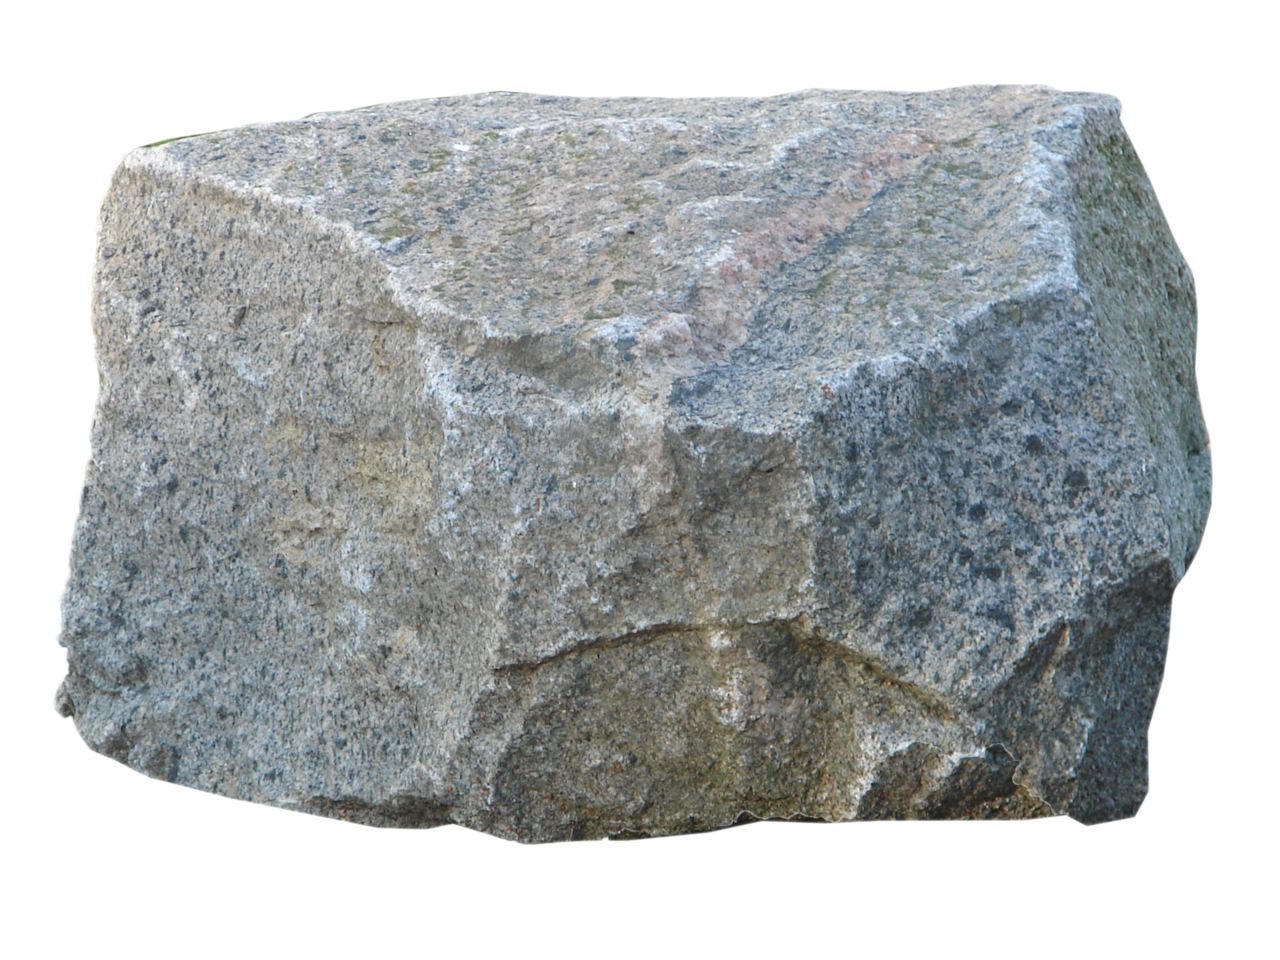 Stones PNG